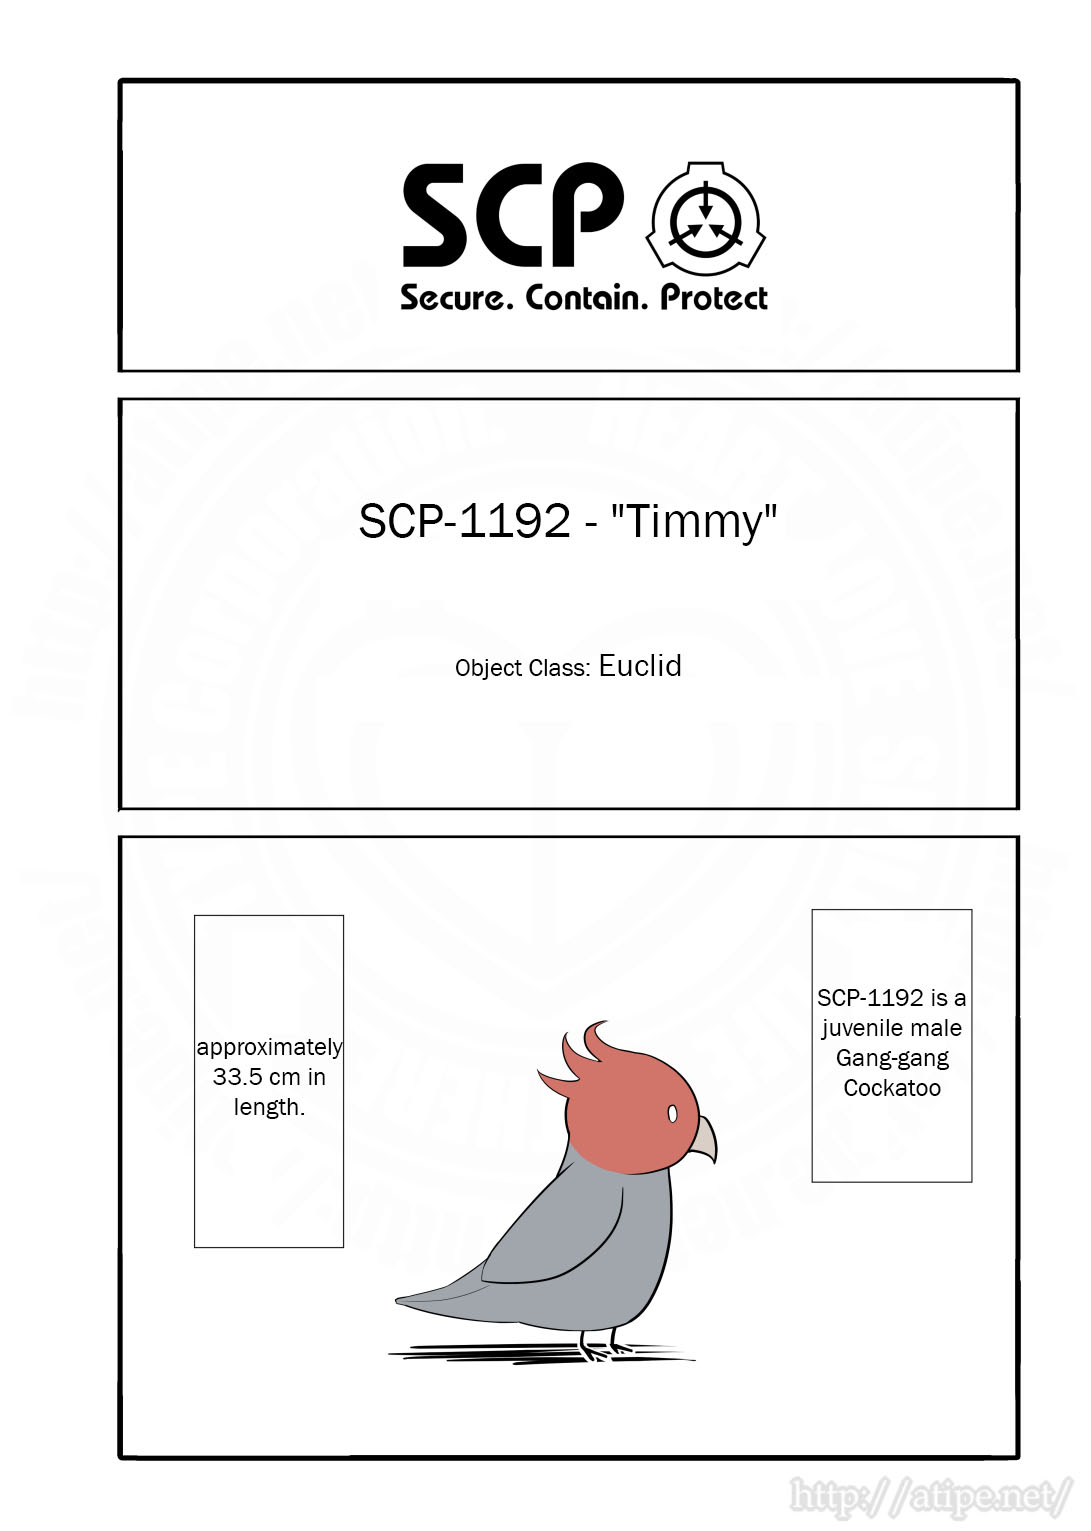 Oversimplified SCP Ch. 22 SCP 1192